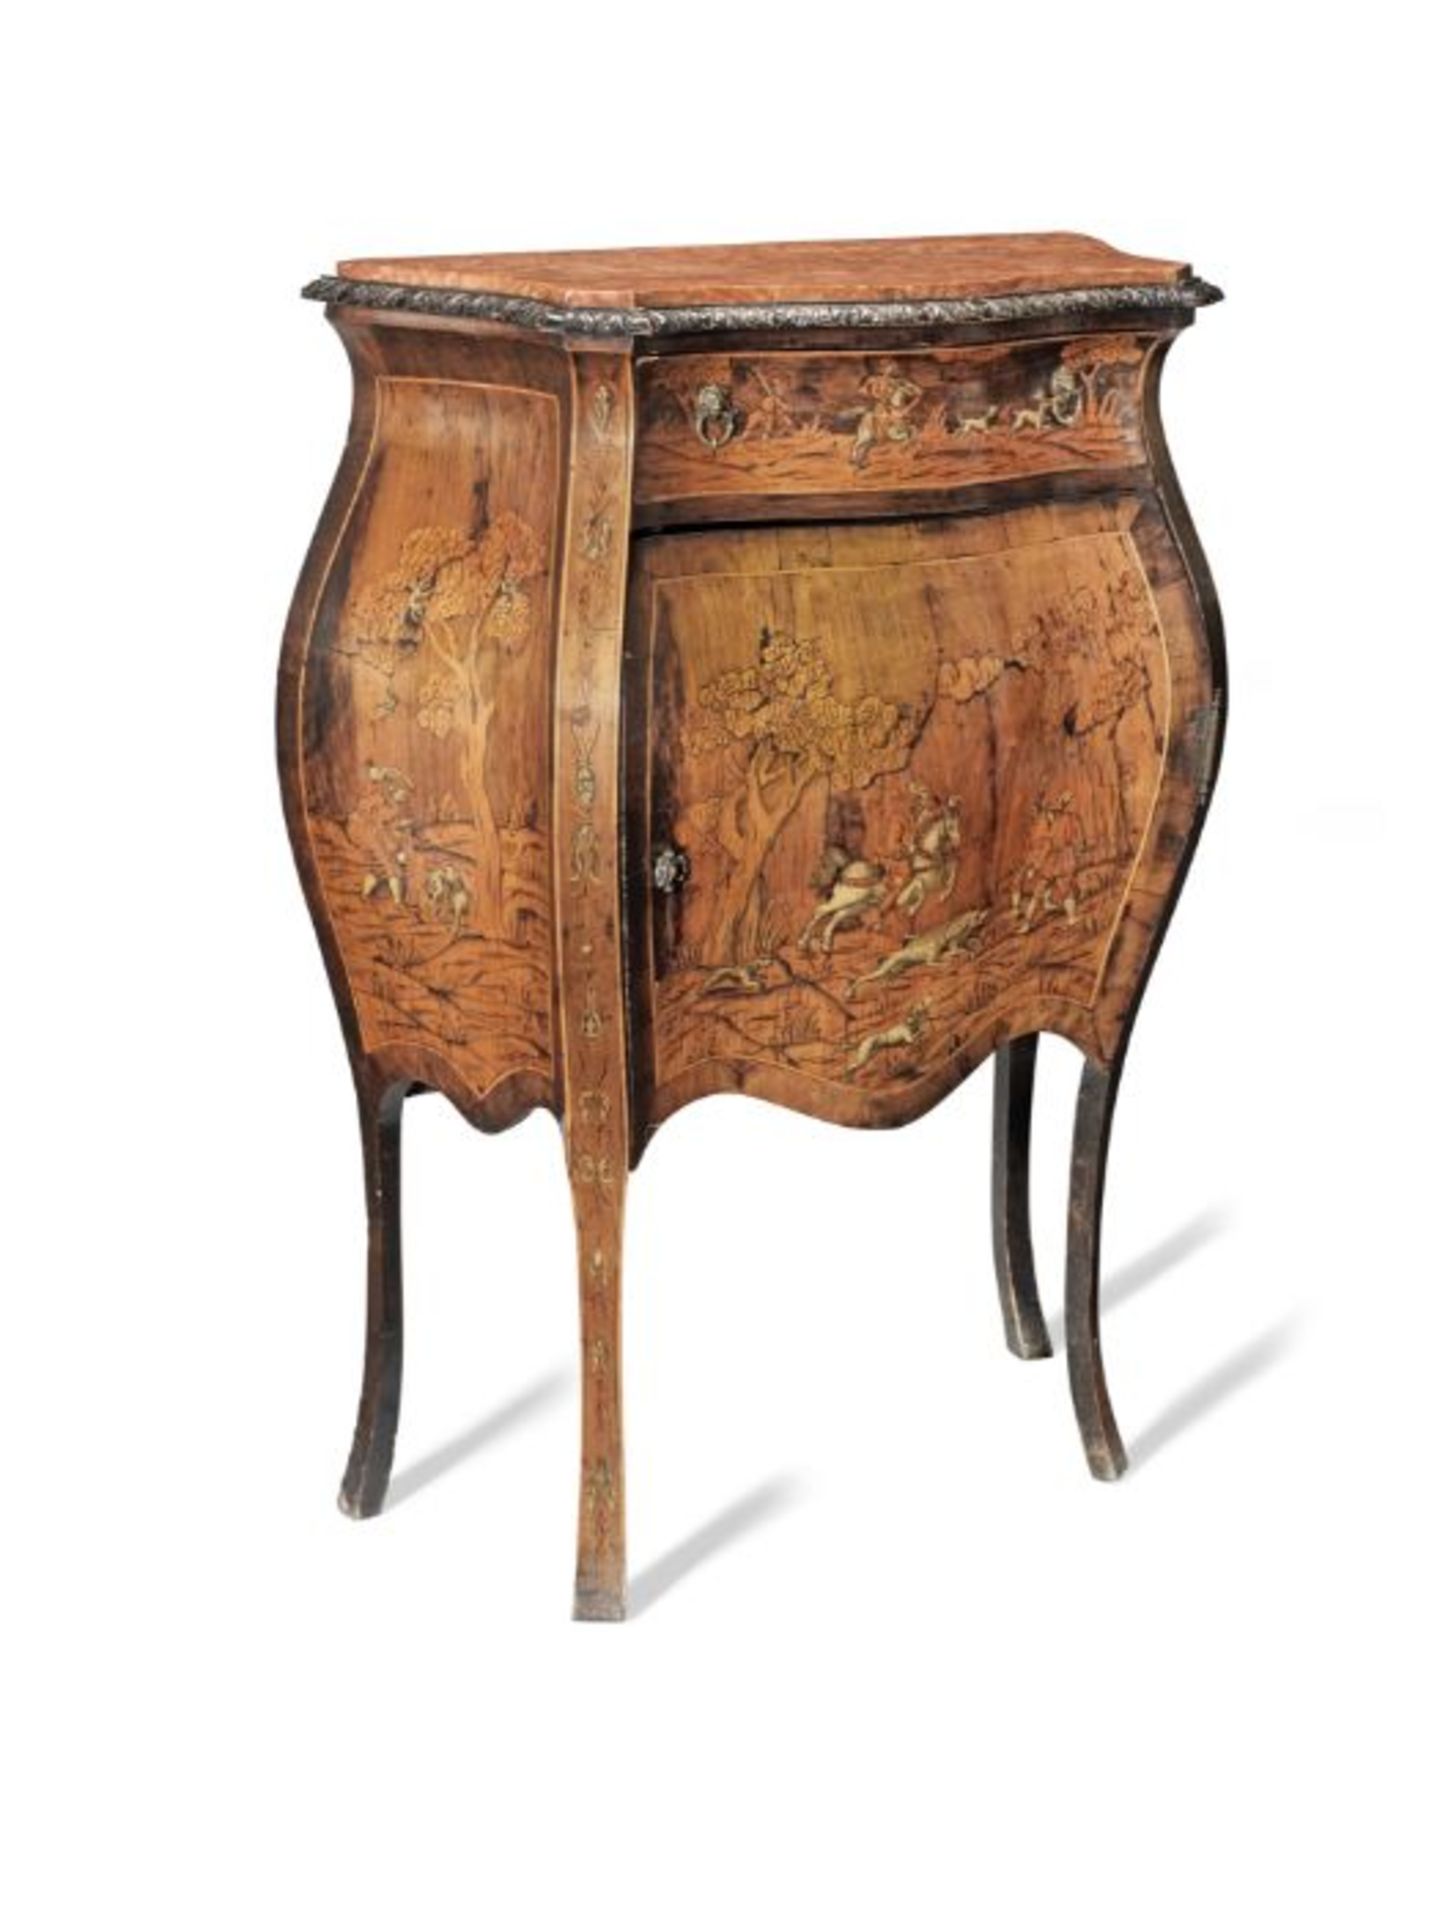 A late 19th / early 20th century marquetry commode